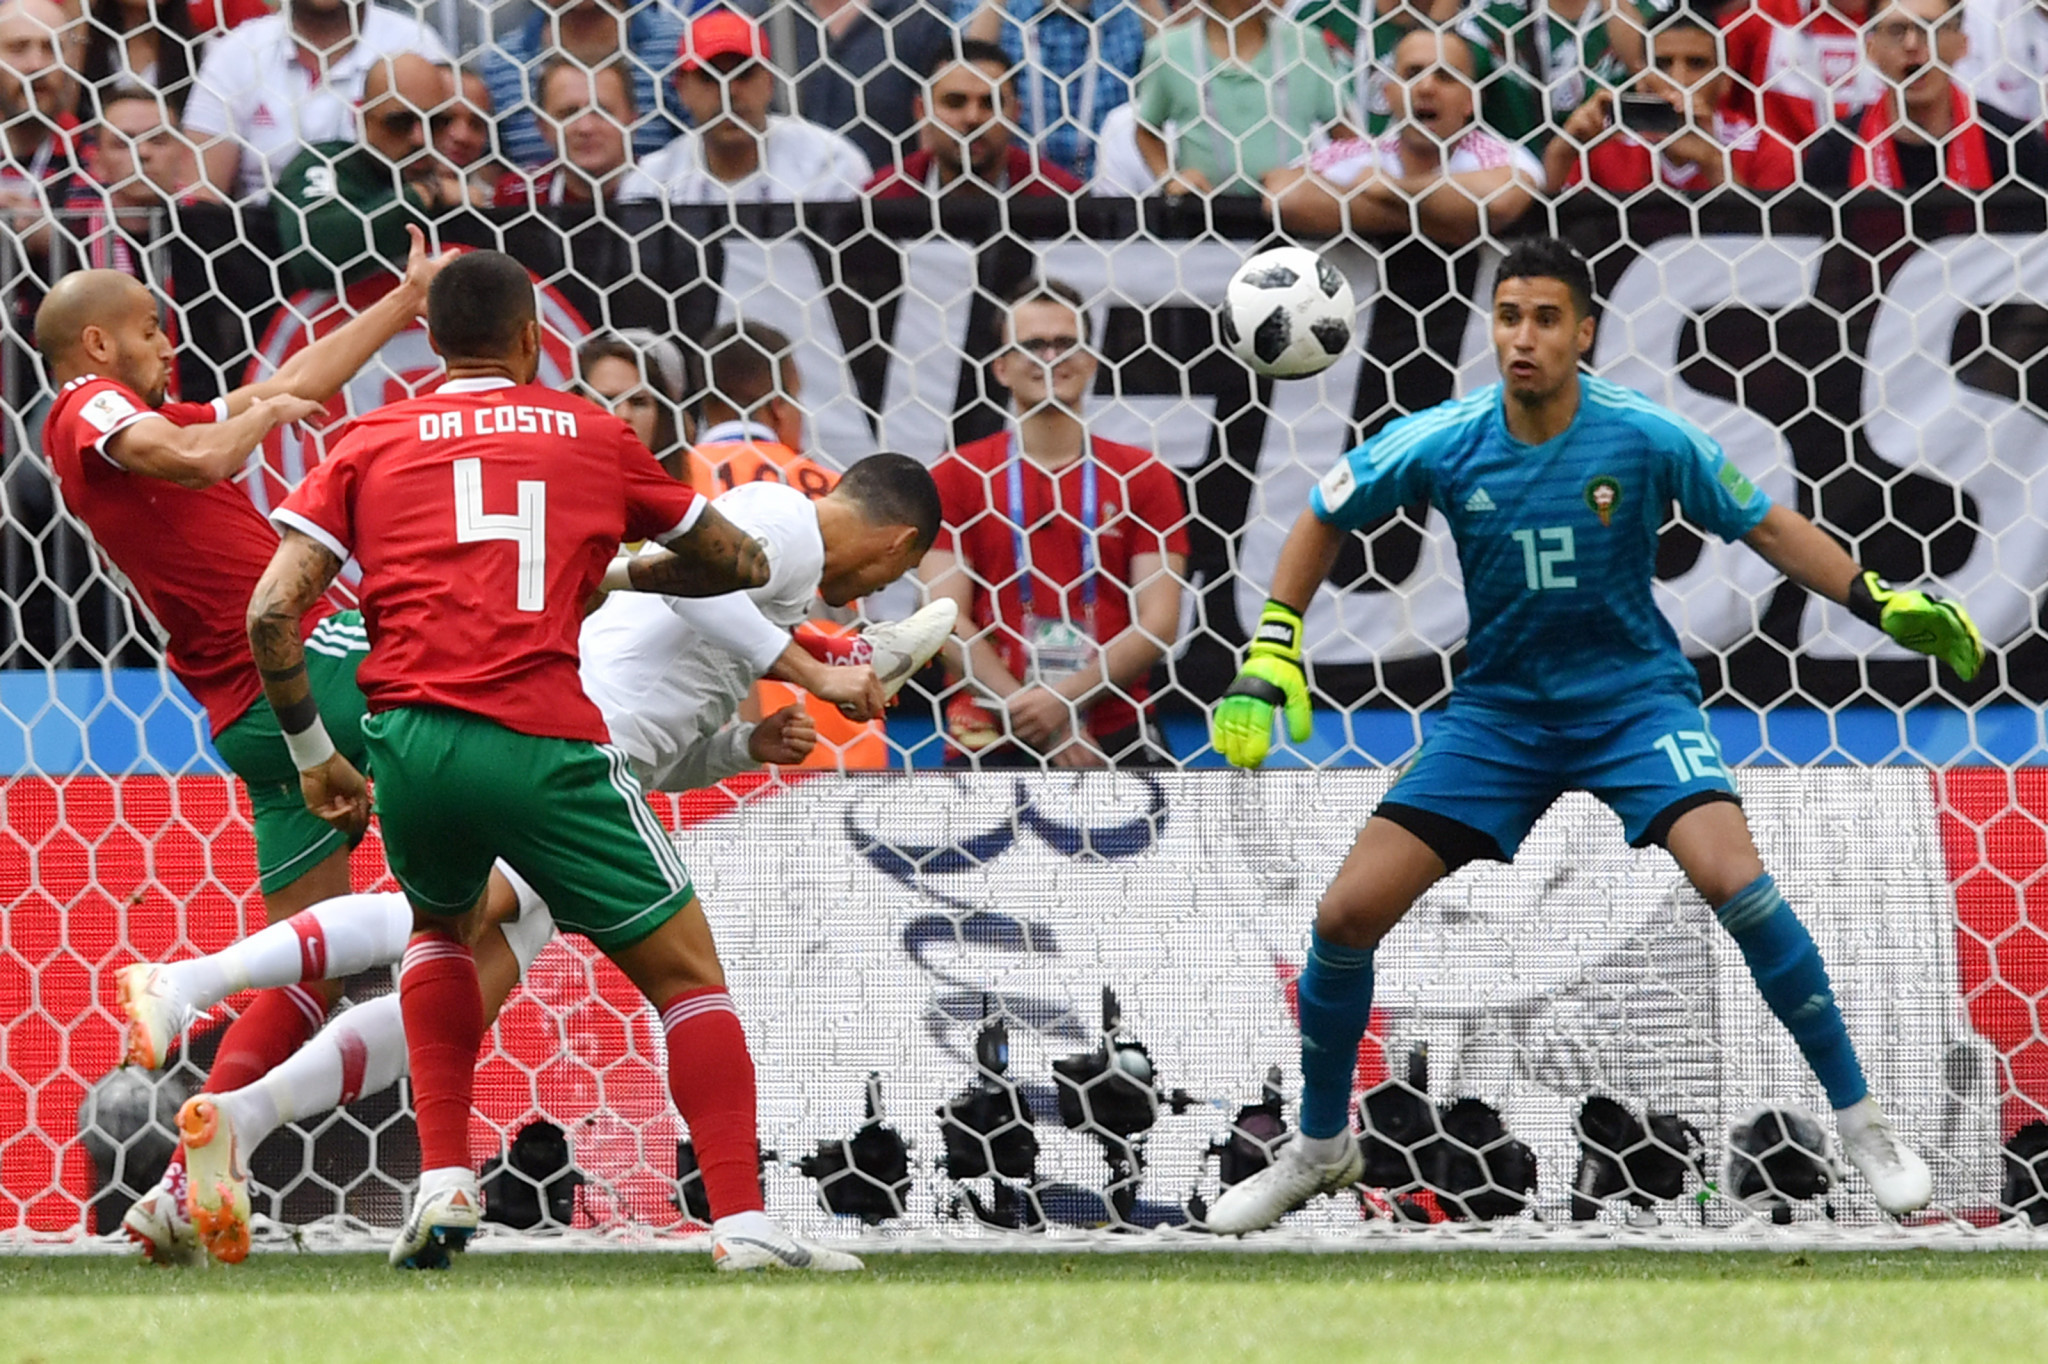 Cristiano Ronaldo heads into the net for his fourth goal of the FIFA World Cup ©Getty Images